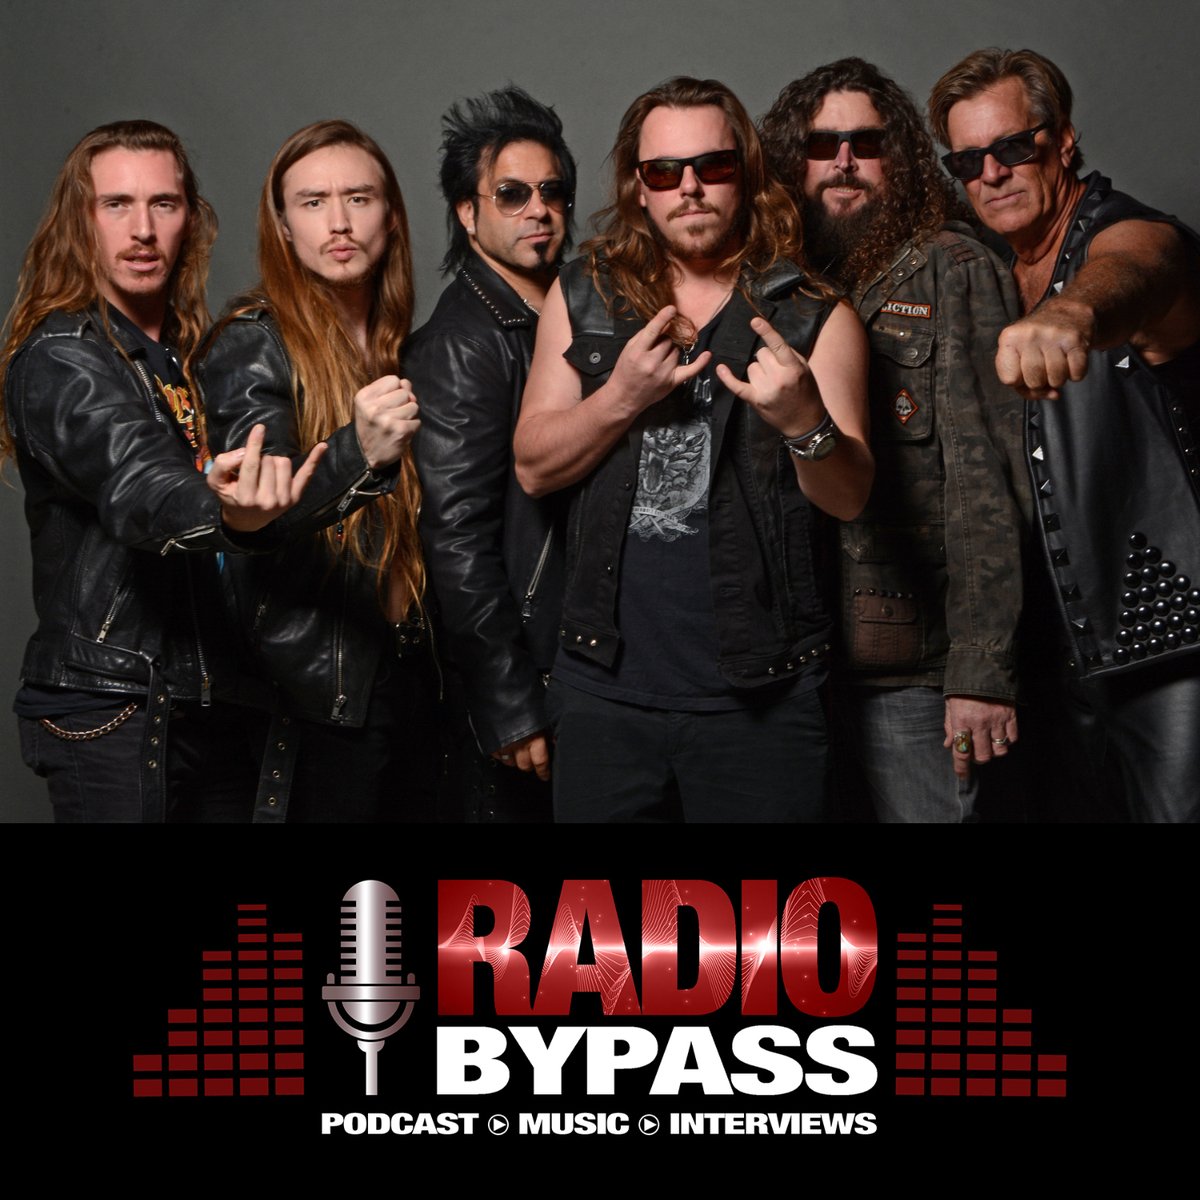 Hey all, did you catch that new tune on
@RadioBypass?  If not - check out the podcast here: blubrry.com/radiobypass/12…!   

#tripleaxeattack #leatherwolf #killthehunted #heavymetal #hardrock #classicmetal #metalradio #radioairplay #lametalscene #orangecounty